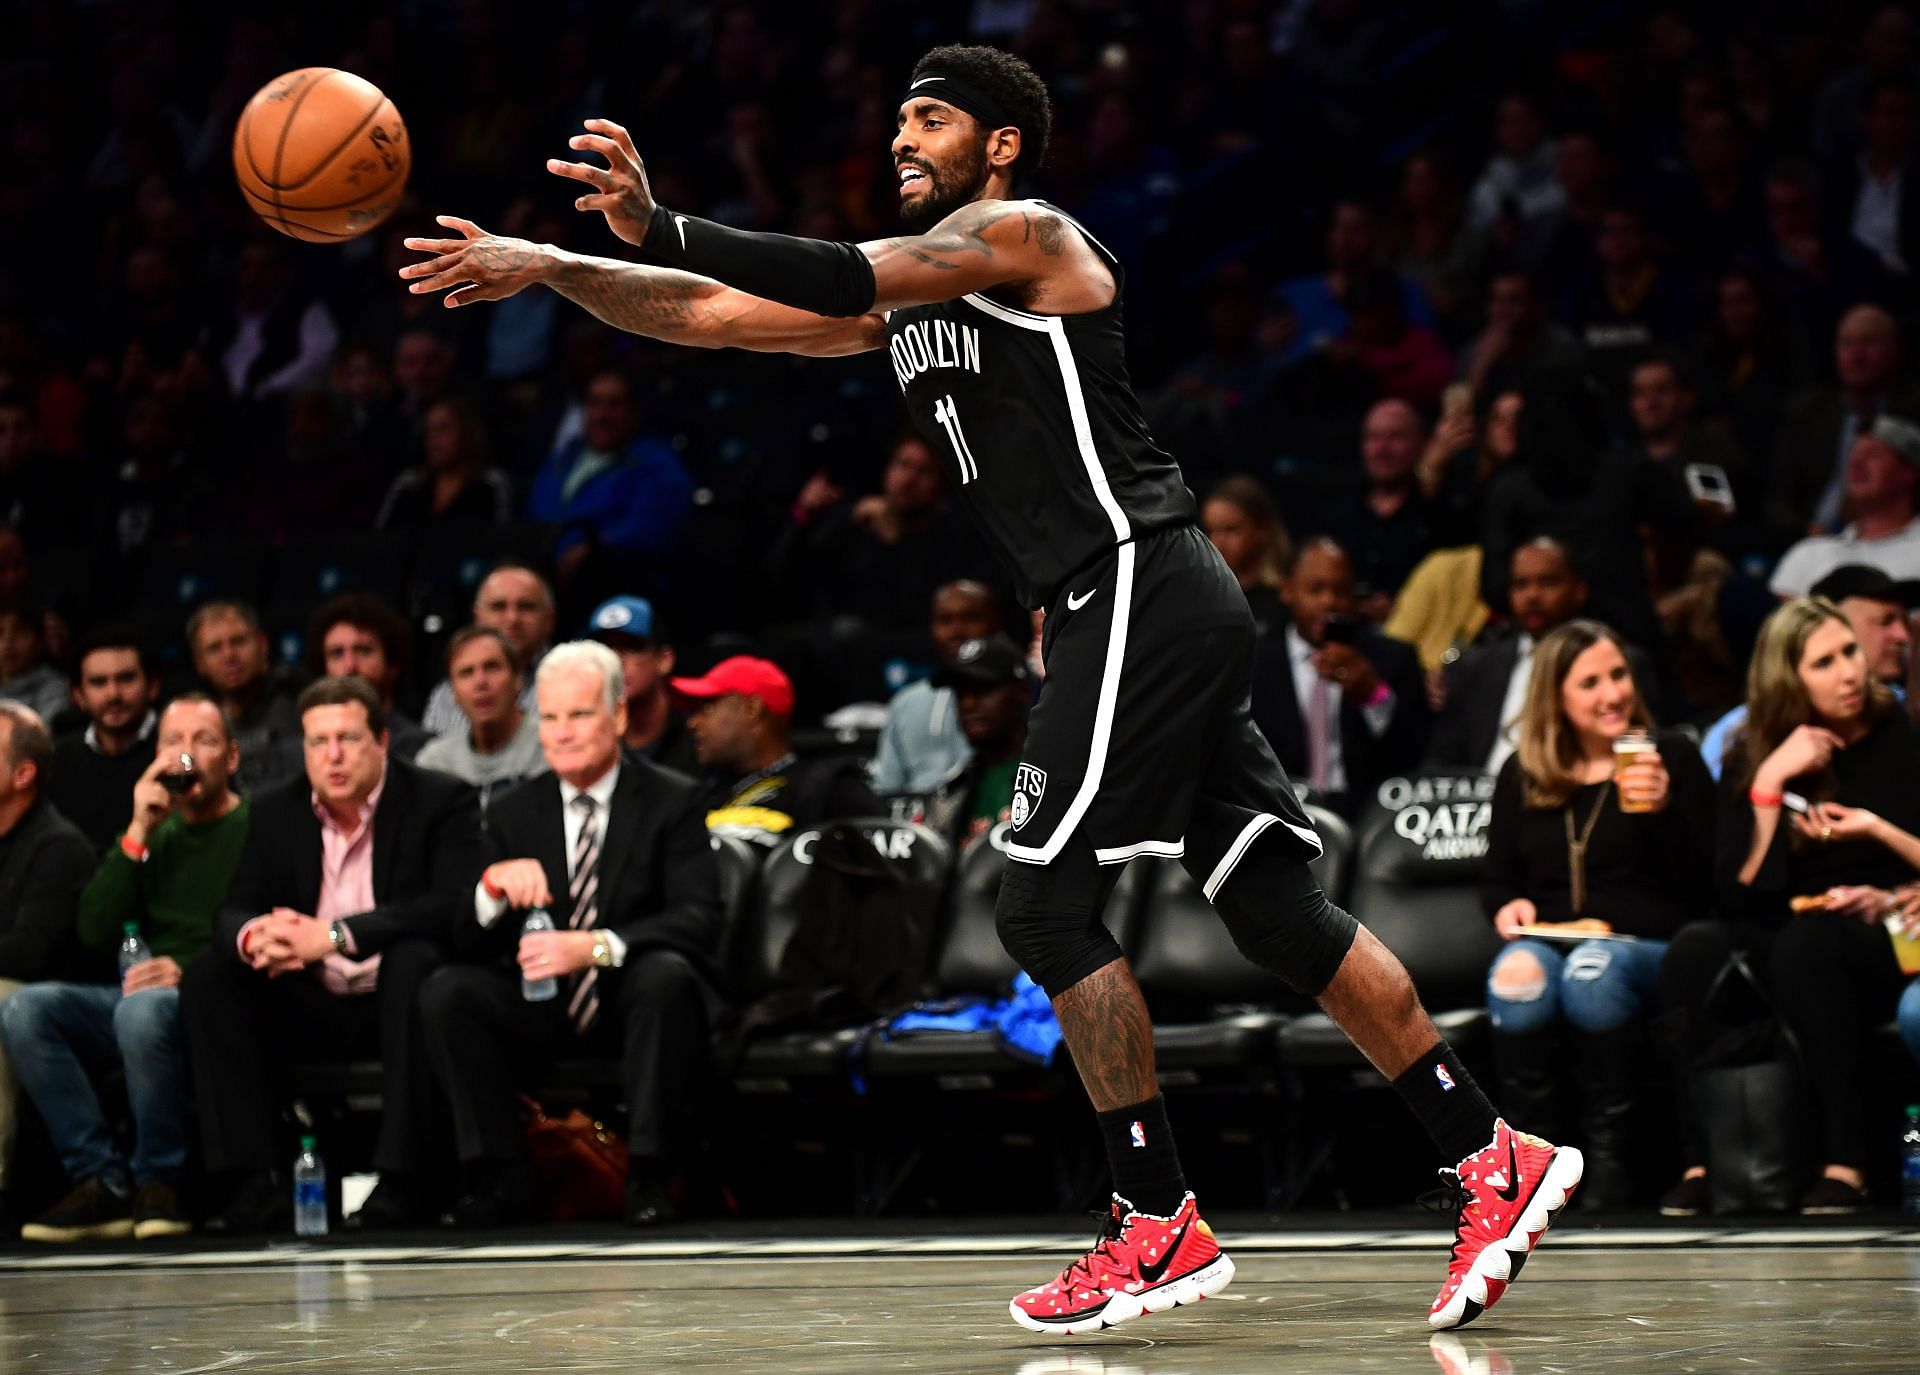 Kyrie Irving is expected to return against the Indiana Pacers